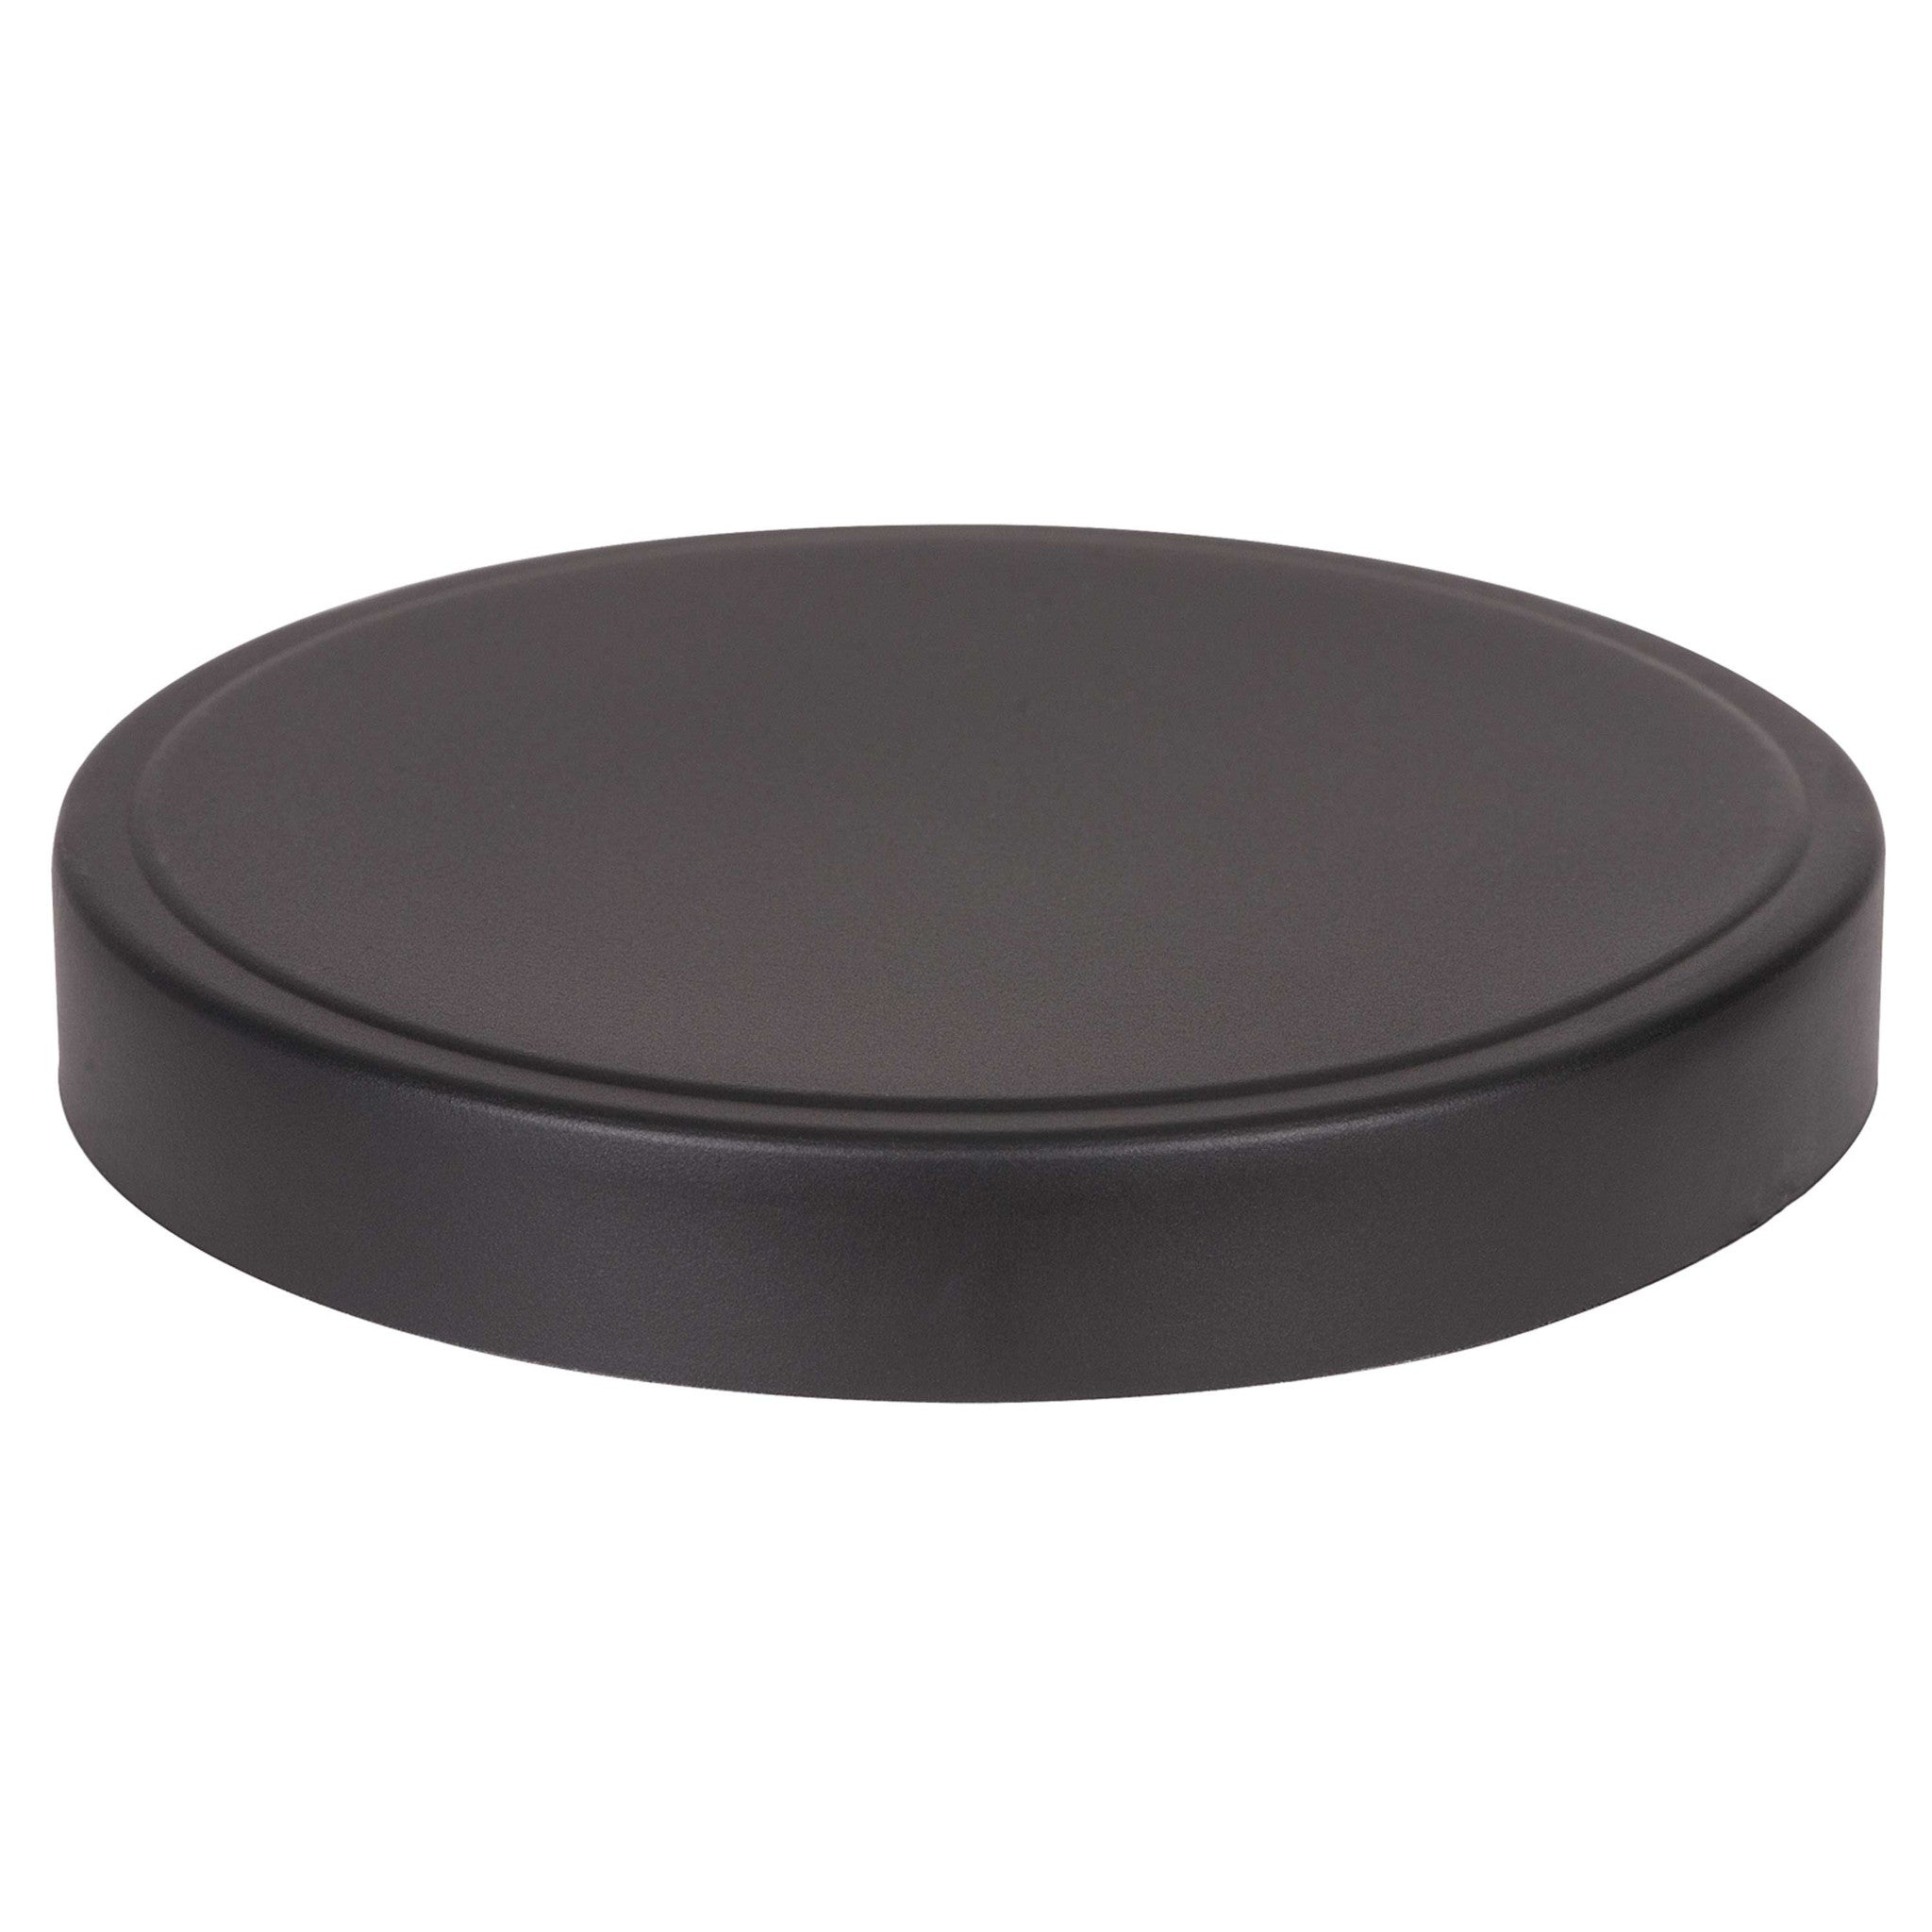 Rear Lens Cap for W-20 Wide Angle Lens